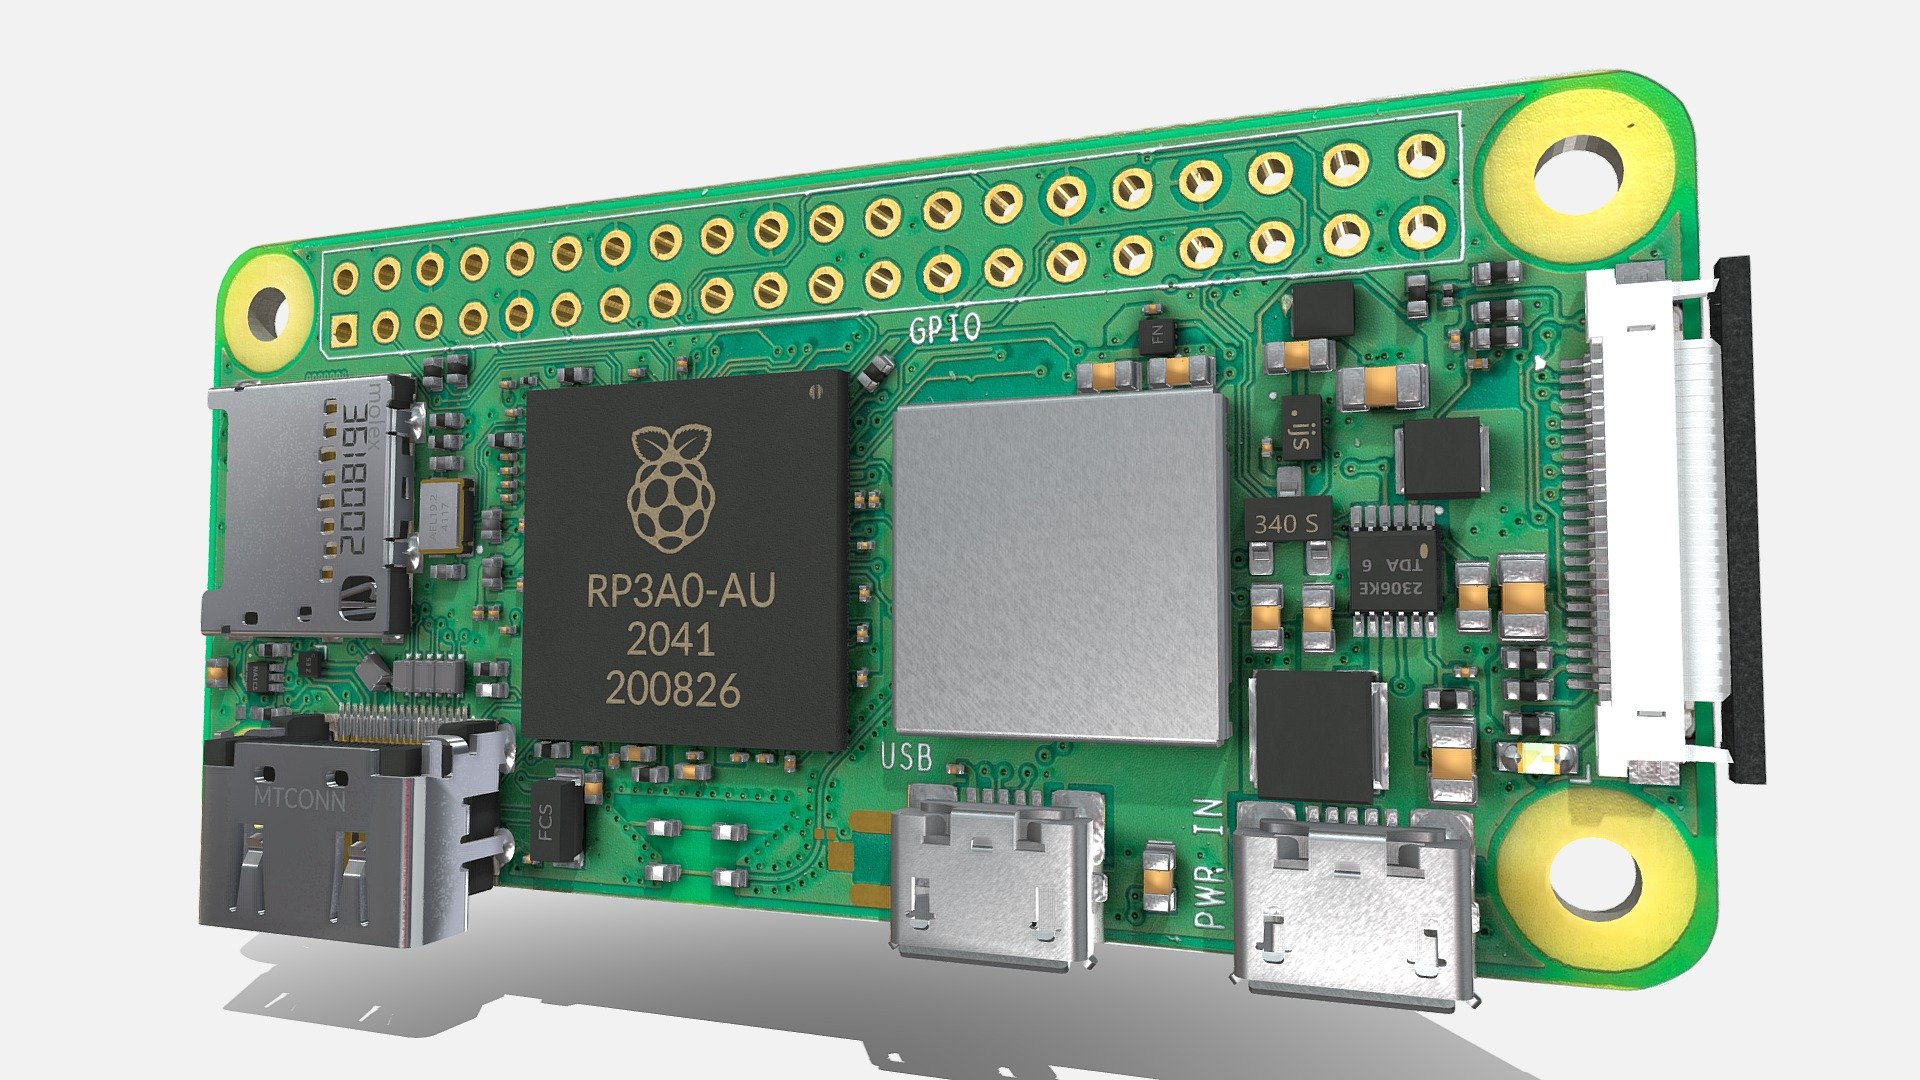 HIGH POLY 3D Model of the new RaspBerry Pi Zero 2 W. 
Description is visible here : https://www.raspberrypi.com/products/raspberry-pi-zero-2-w/

Model designed with blender tools v2.81. 

All components can be modified (translate, delete,…).

Don’t hesitate to comment somes hardware references that you want to see in sketchfab.

The old model Raspberry pi Zero W is available here : 
https://sketchfab.com/3d-models/raspberry-pi-zero-w-b15c8b6c789a485d857300060a4dee13
 - RaspBerry Pi Zero 2 W - Buy Royalty Free 3D model by F2A (@Fa_Sketch) 3d model